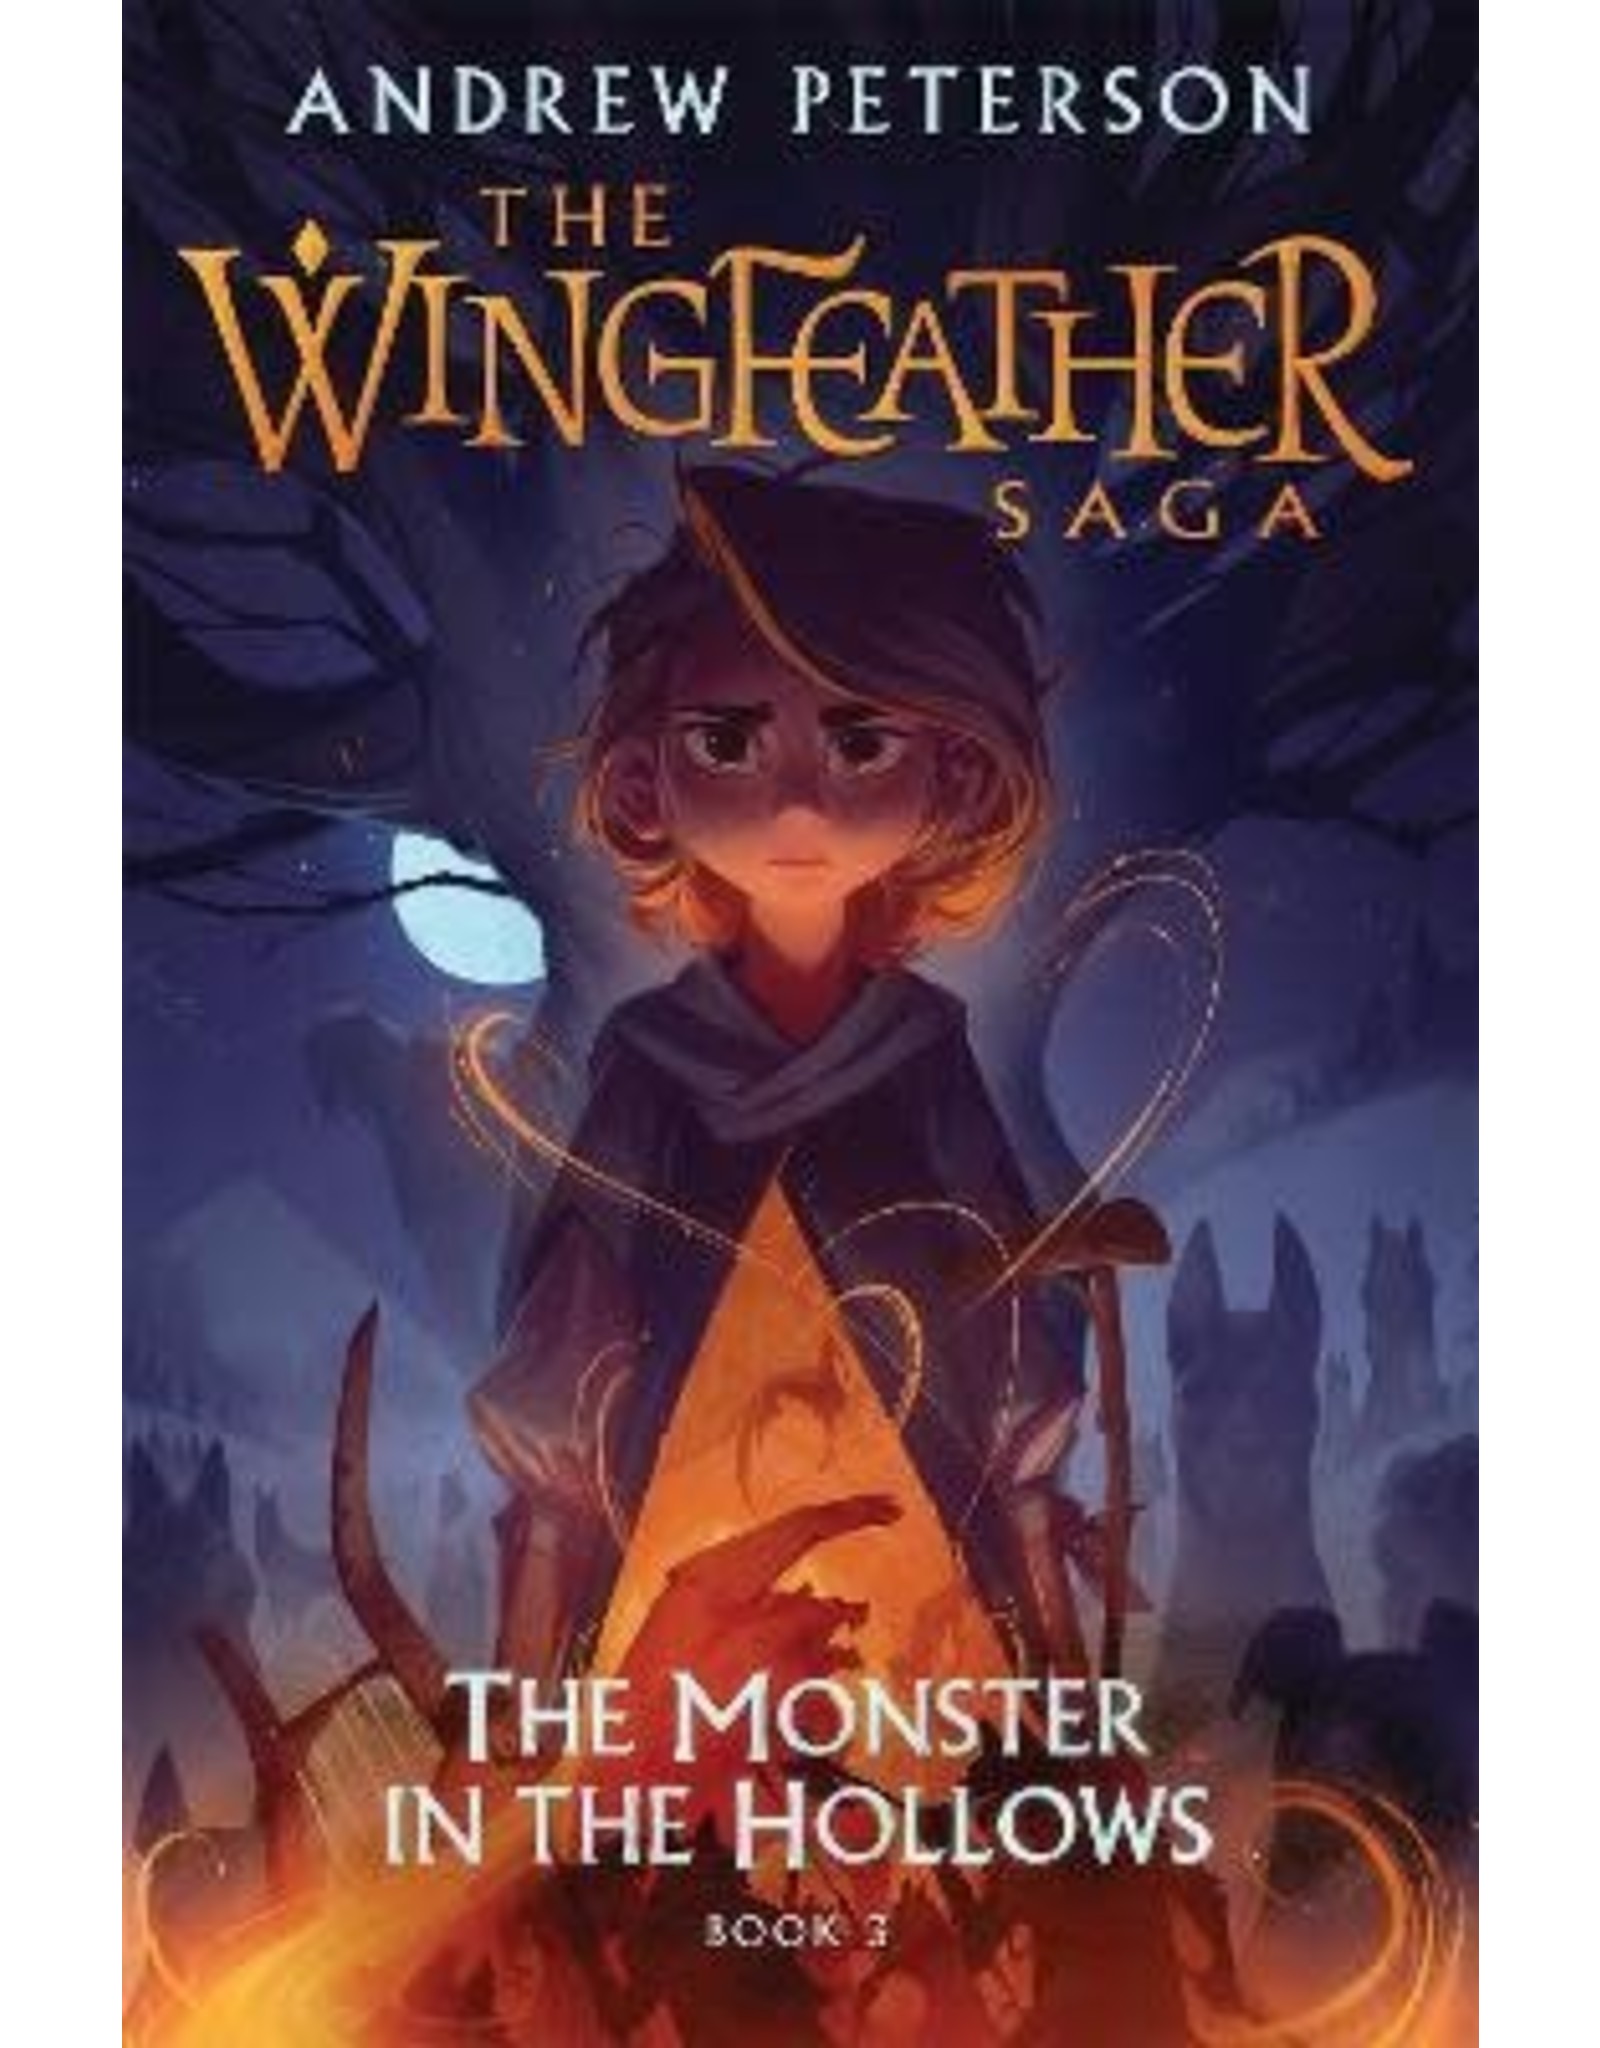 Monster in the Hollows-Wingfeather Saga-Book 3 PB